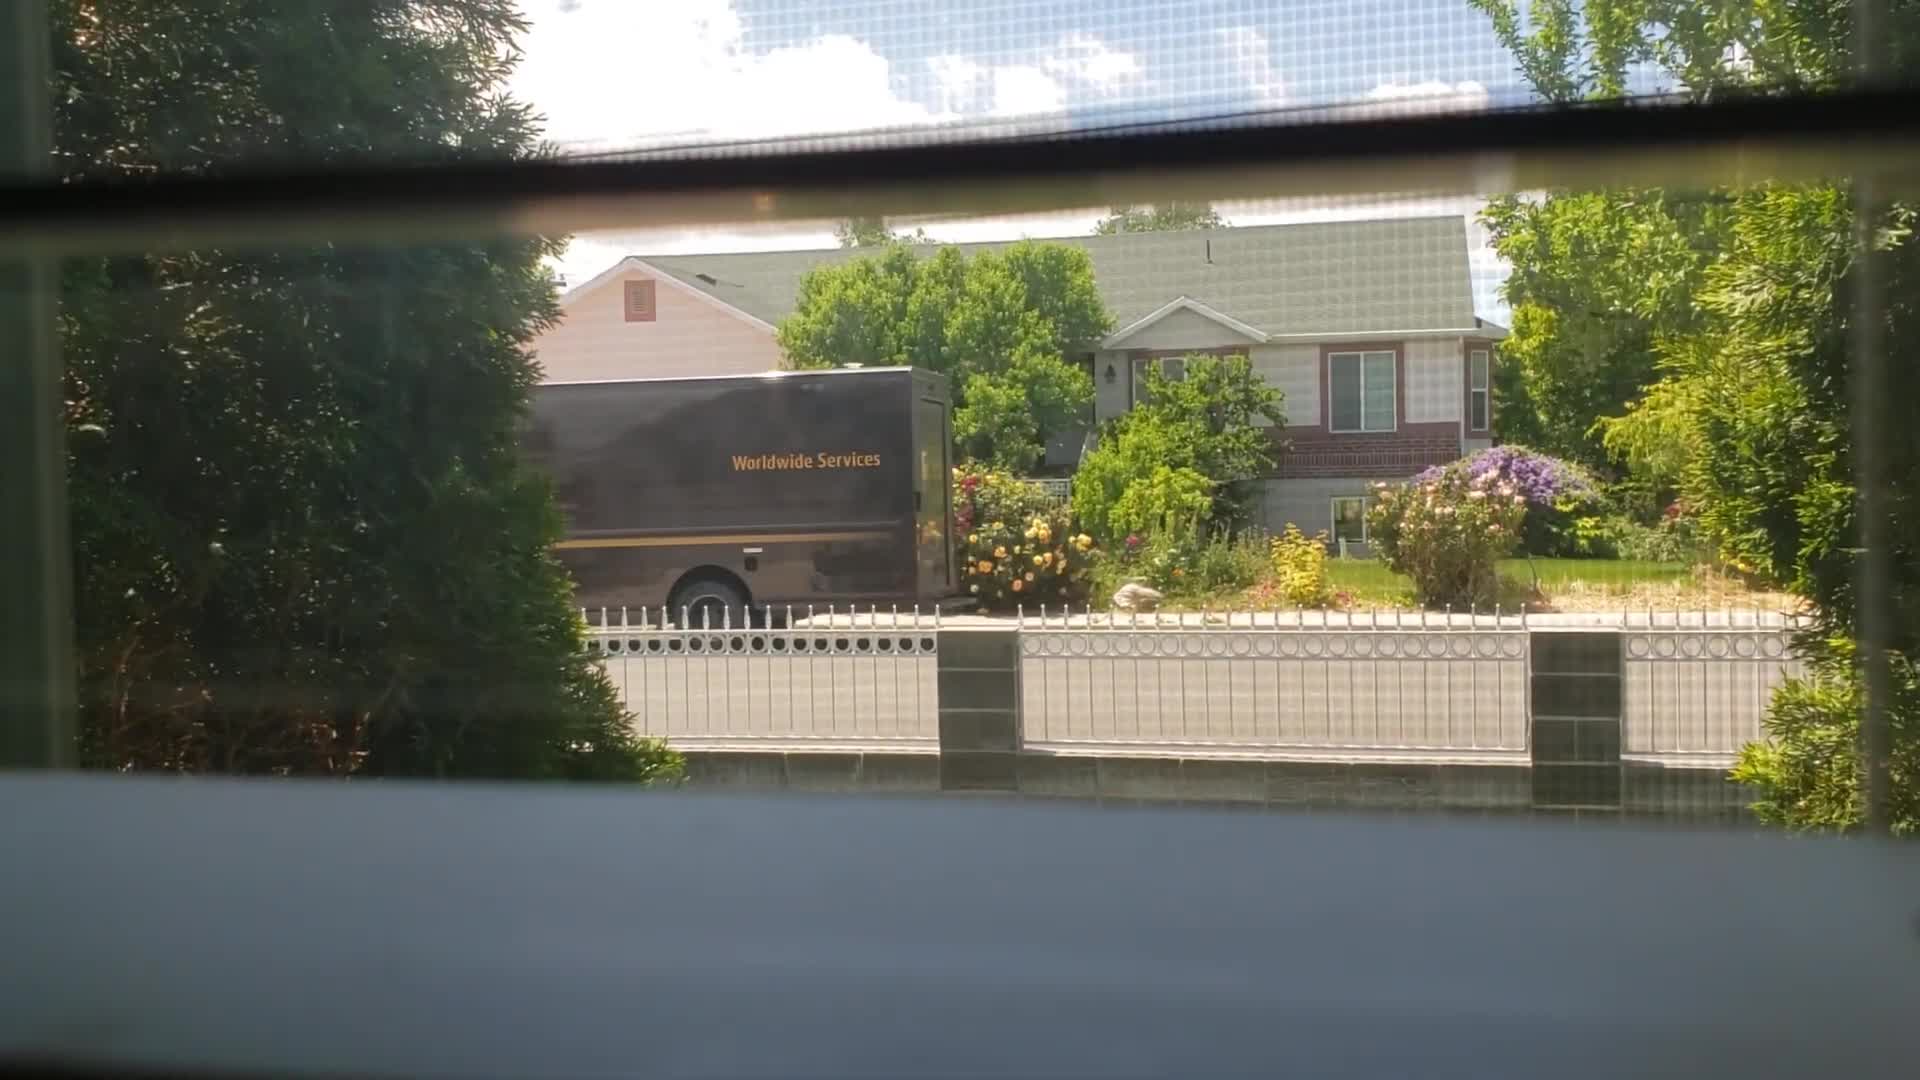 UPS Truck outside my house - Recorded on June 13, 2022, at 1:50PM MT